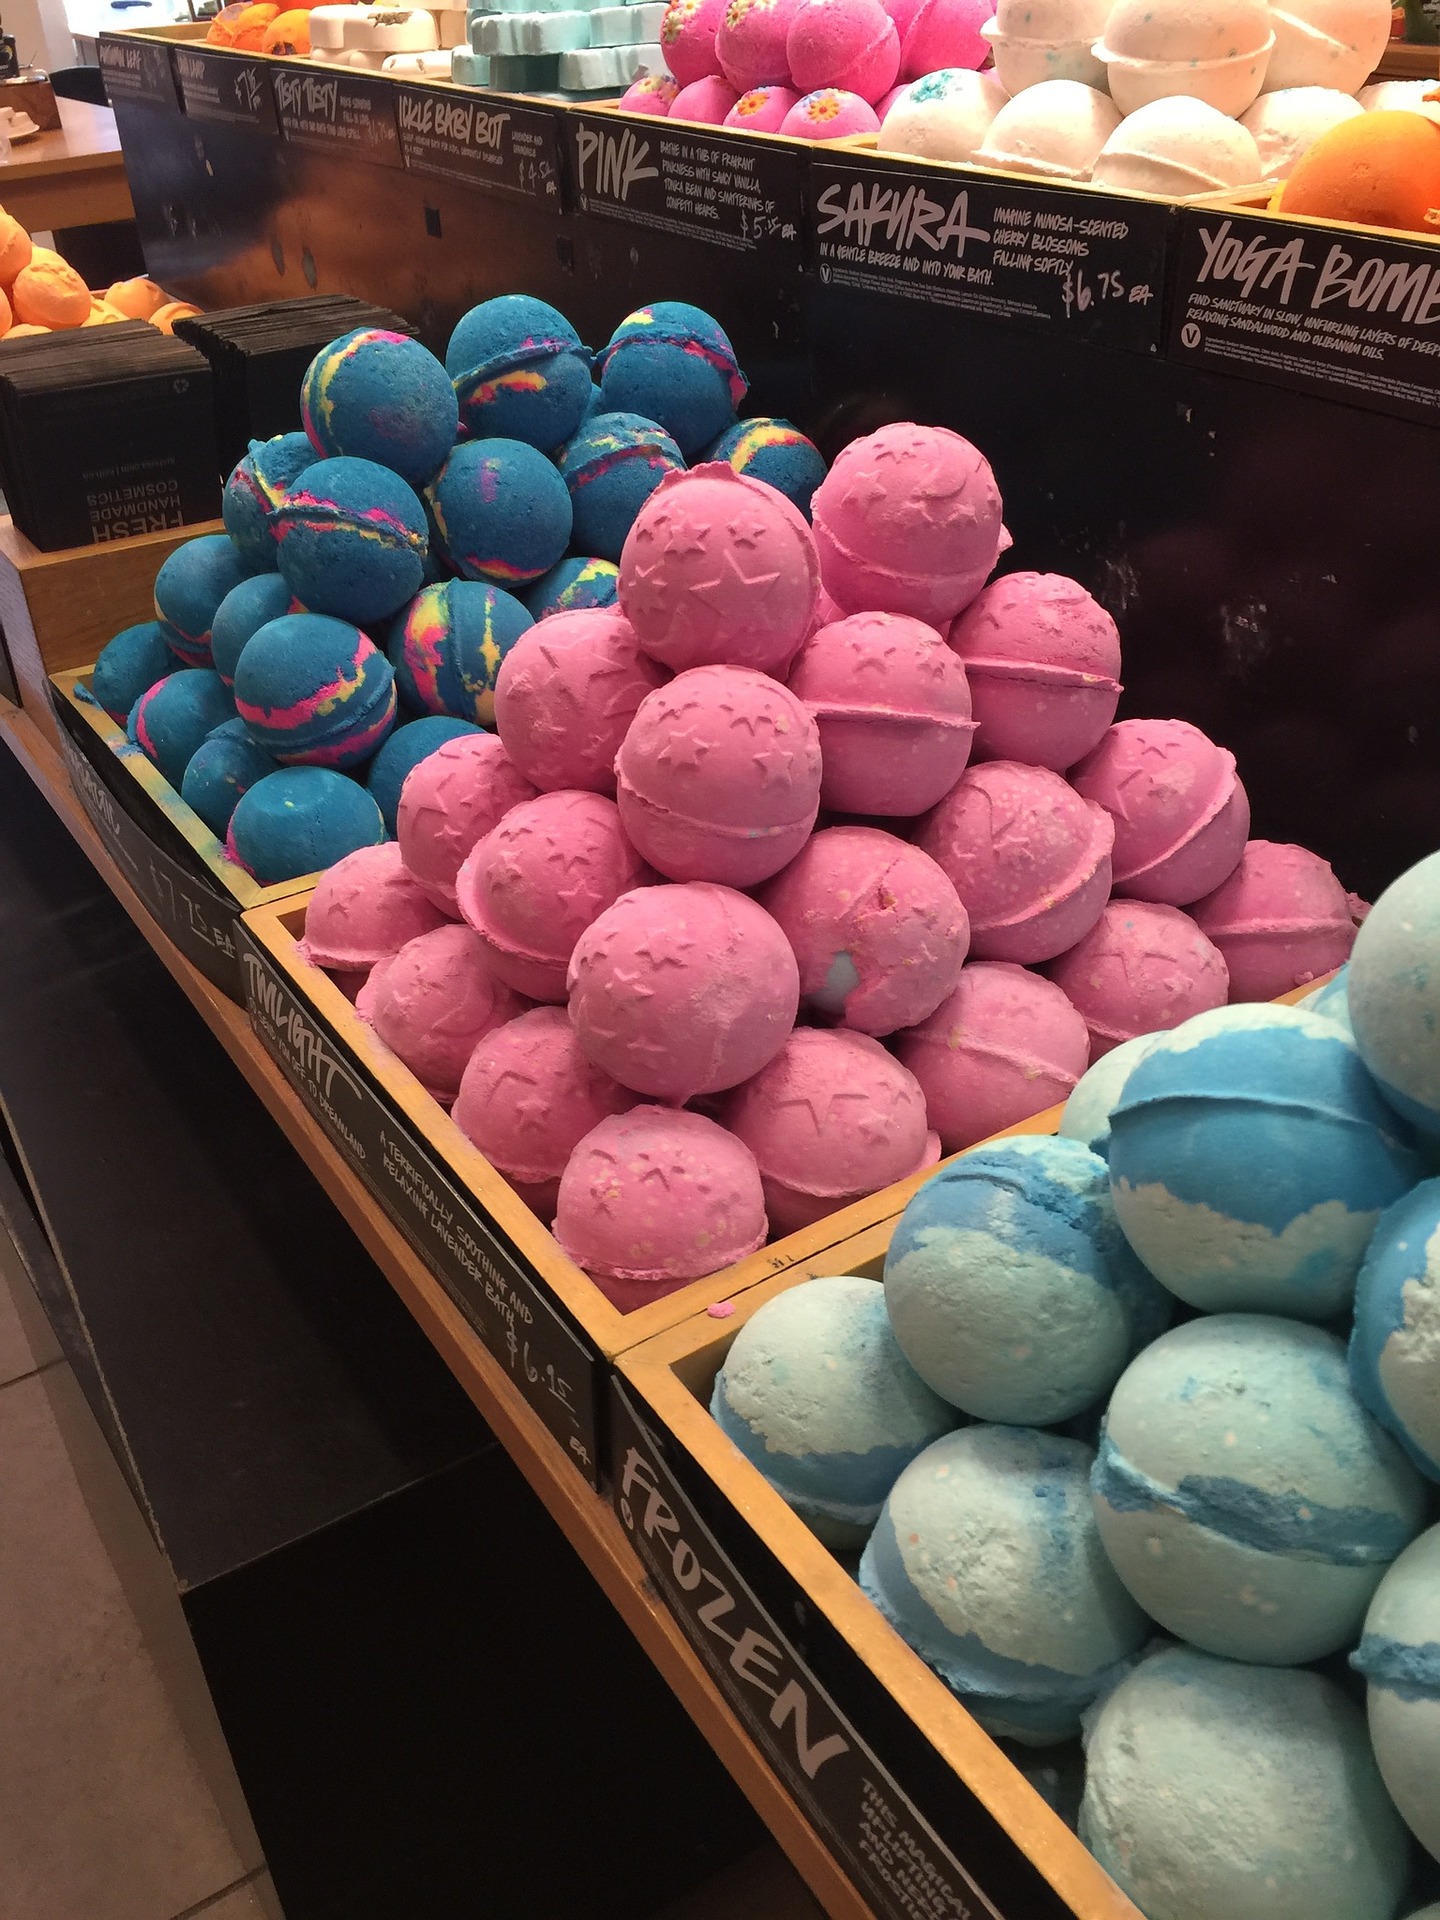 Shelves with blue and pink bath bombs